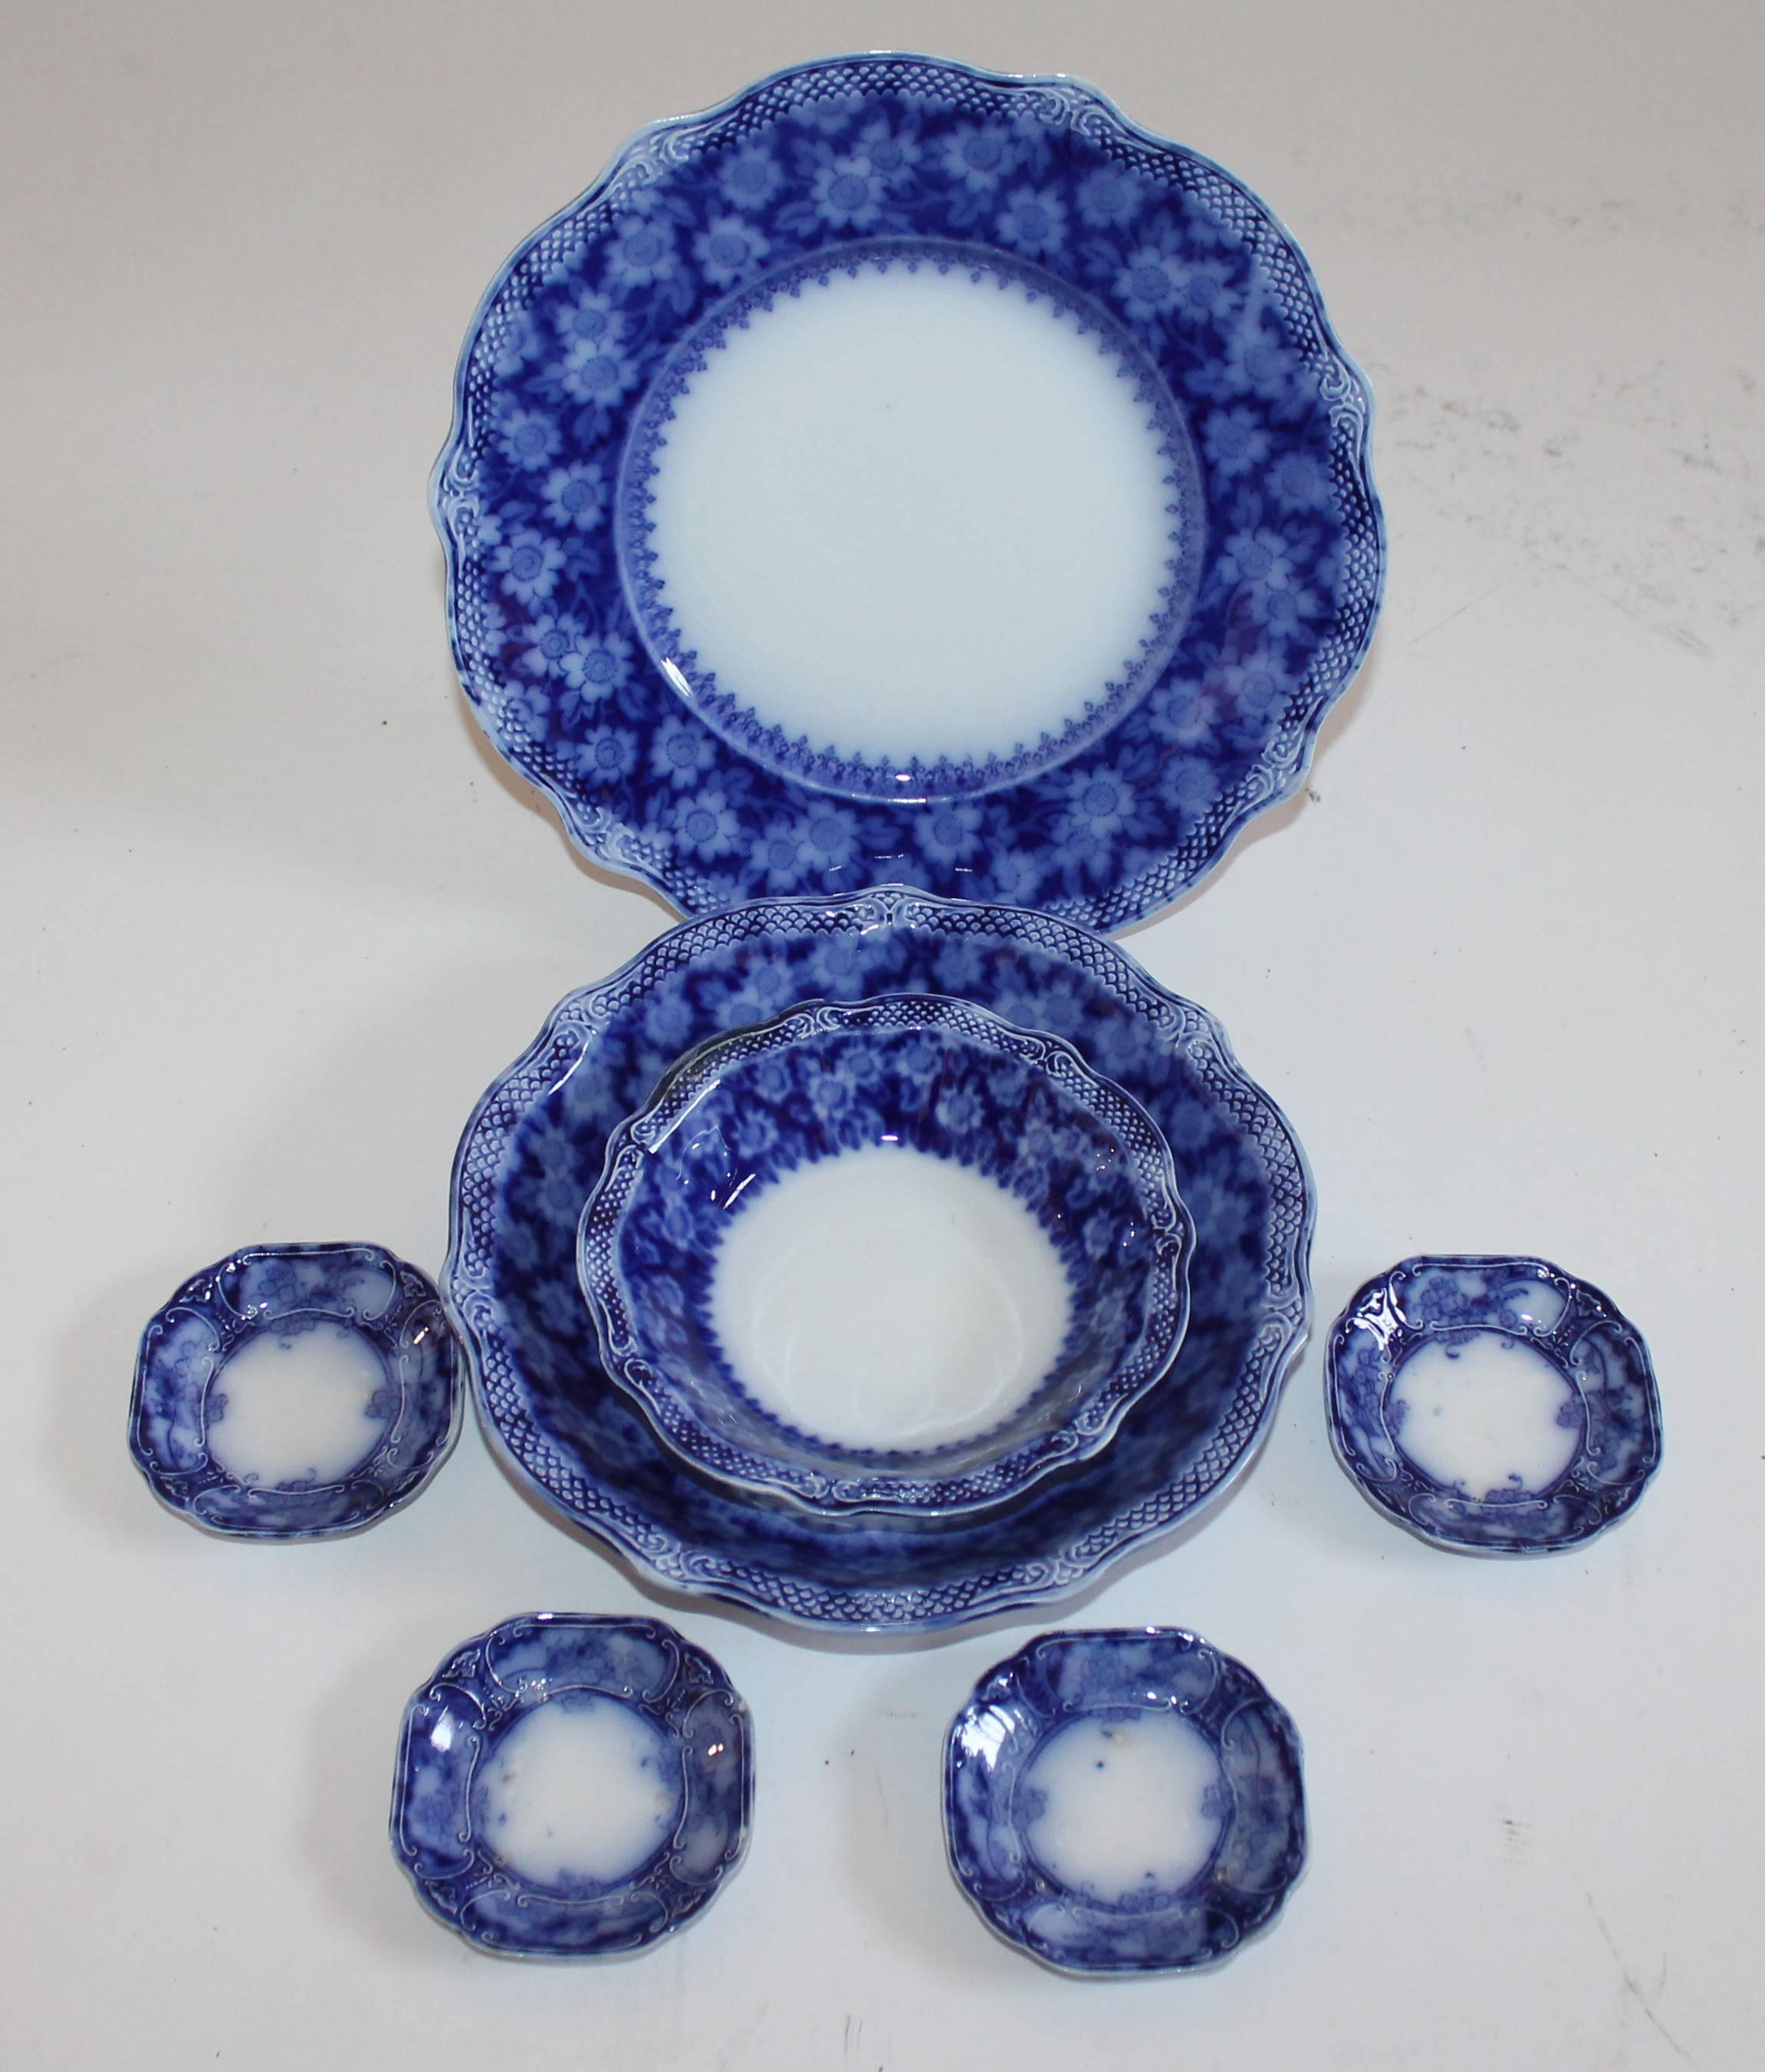 Beautiful Till & Sons set of seven bowls and plates. These English made plates and bowls are a stunning sight. The blue rims of eat plate and bowl a filled with a beautiful floral pattern. The smallest four plates have am ivy with floral pattern.